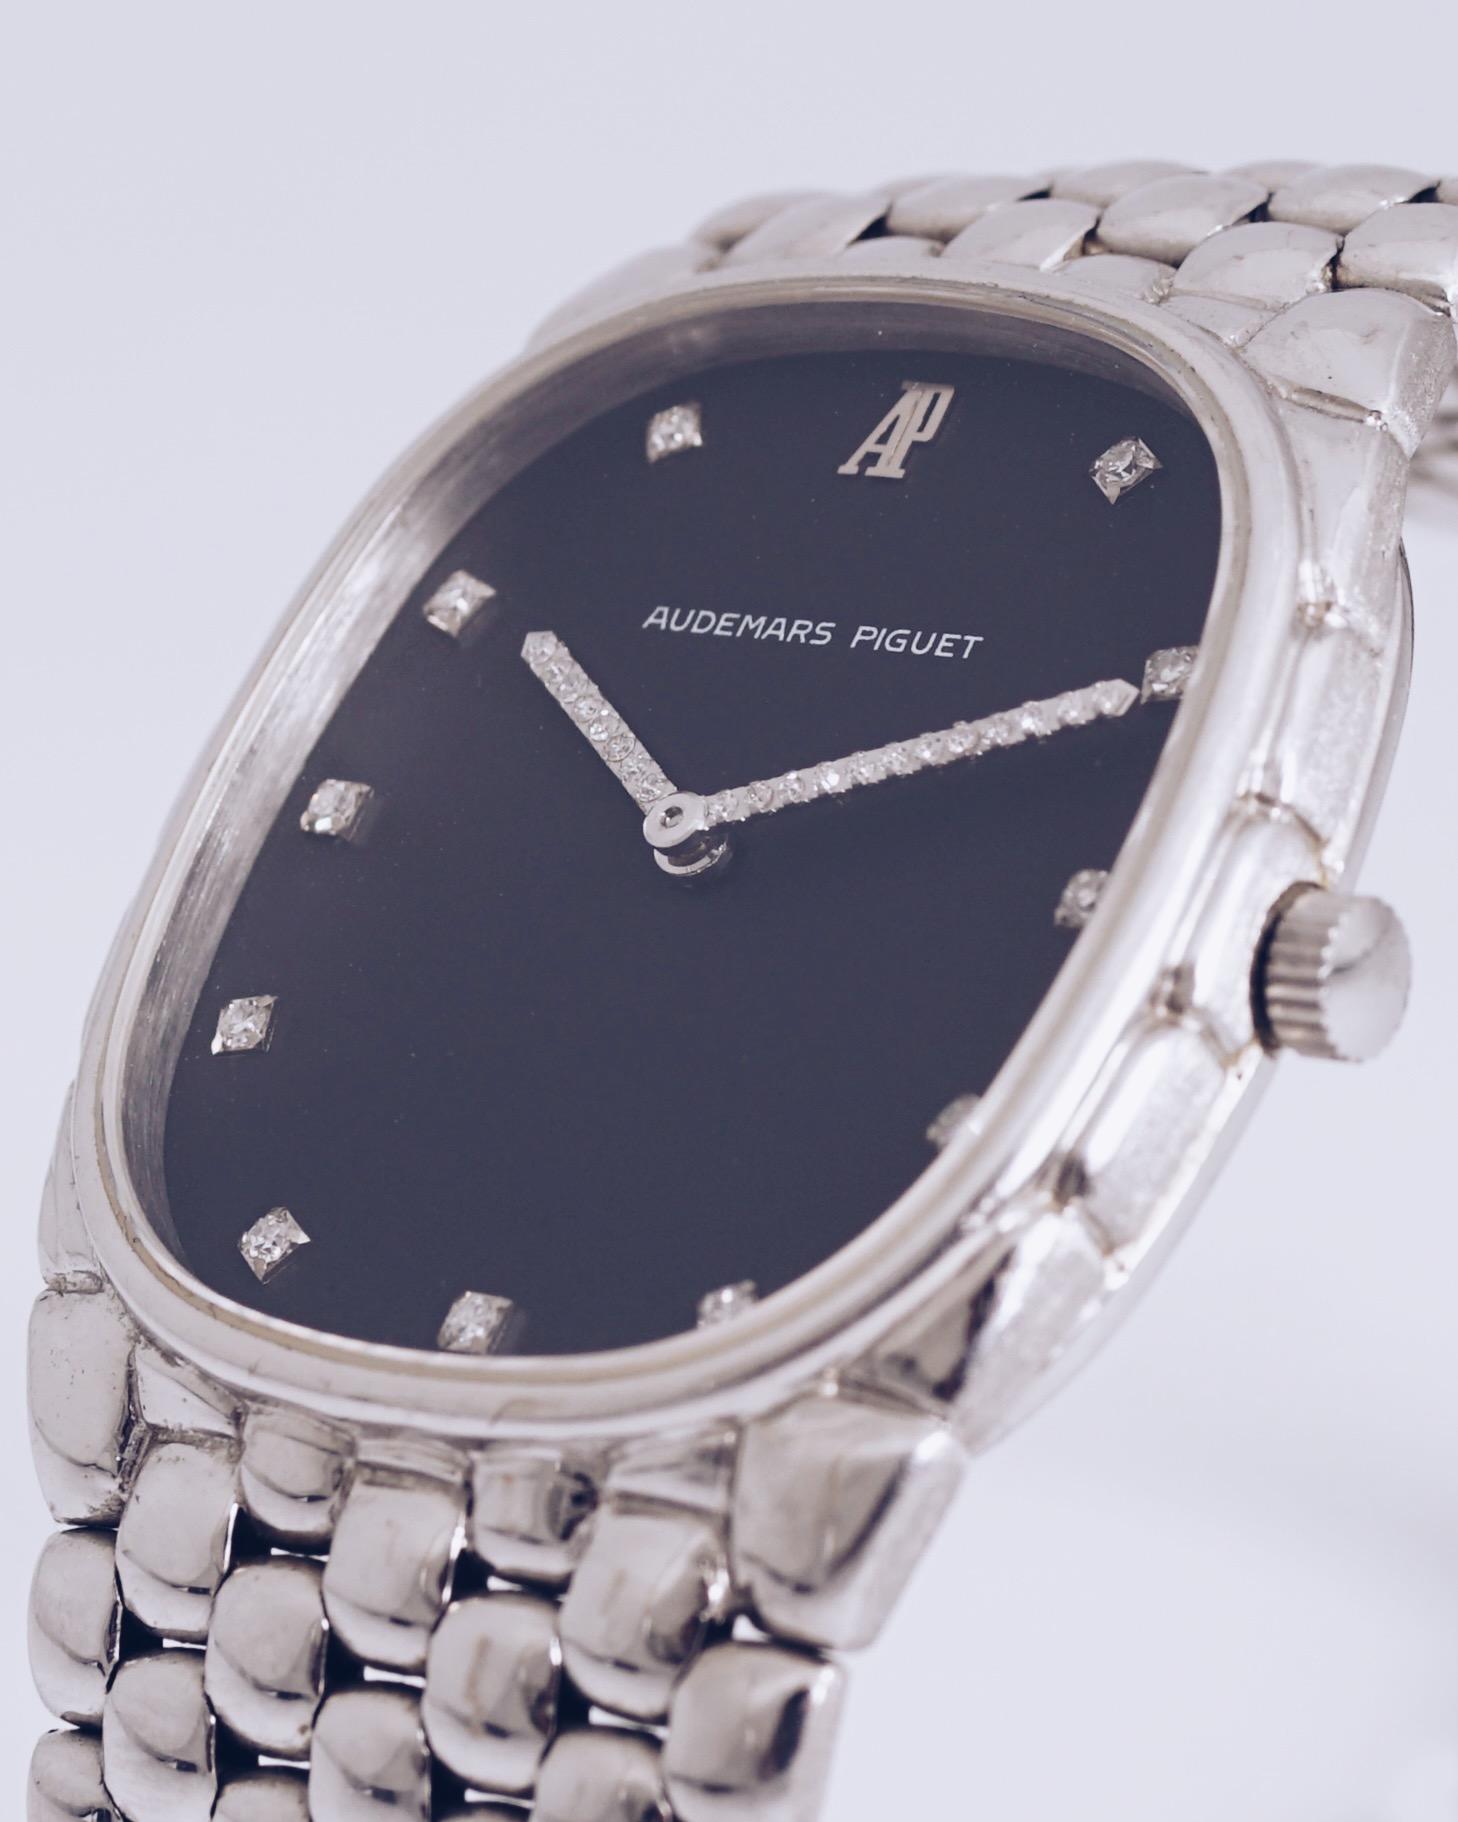 Superb and rare Audemars Piguet Cobra watch entirely in 18-carat white gold (84.4 grams) with navy blue dial, diamond indexes and diamond-set hands !
It is very rare to find this watch in its original condition,  with the AP logo at noon, the period